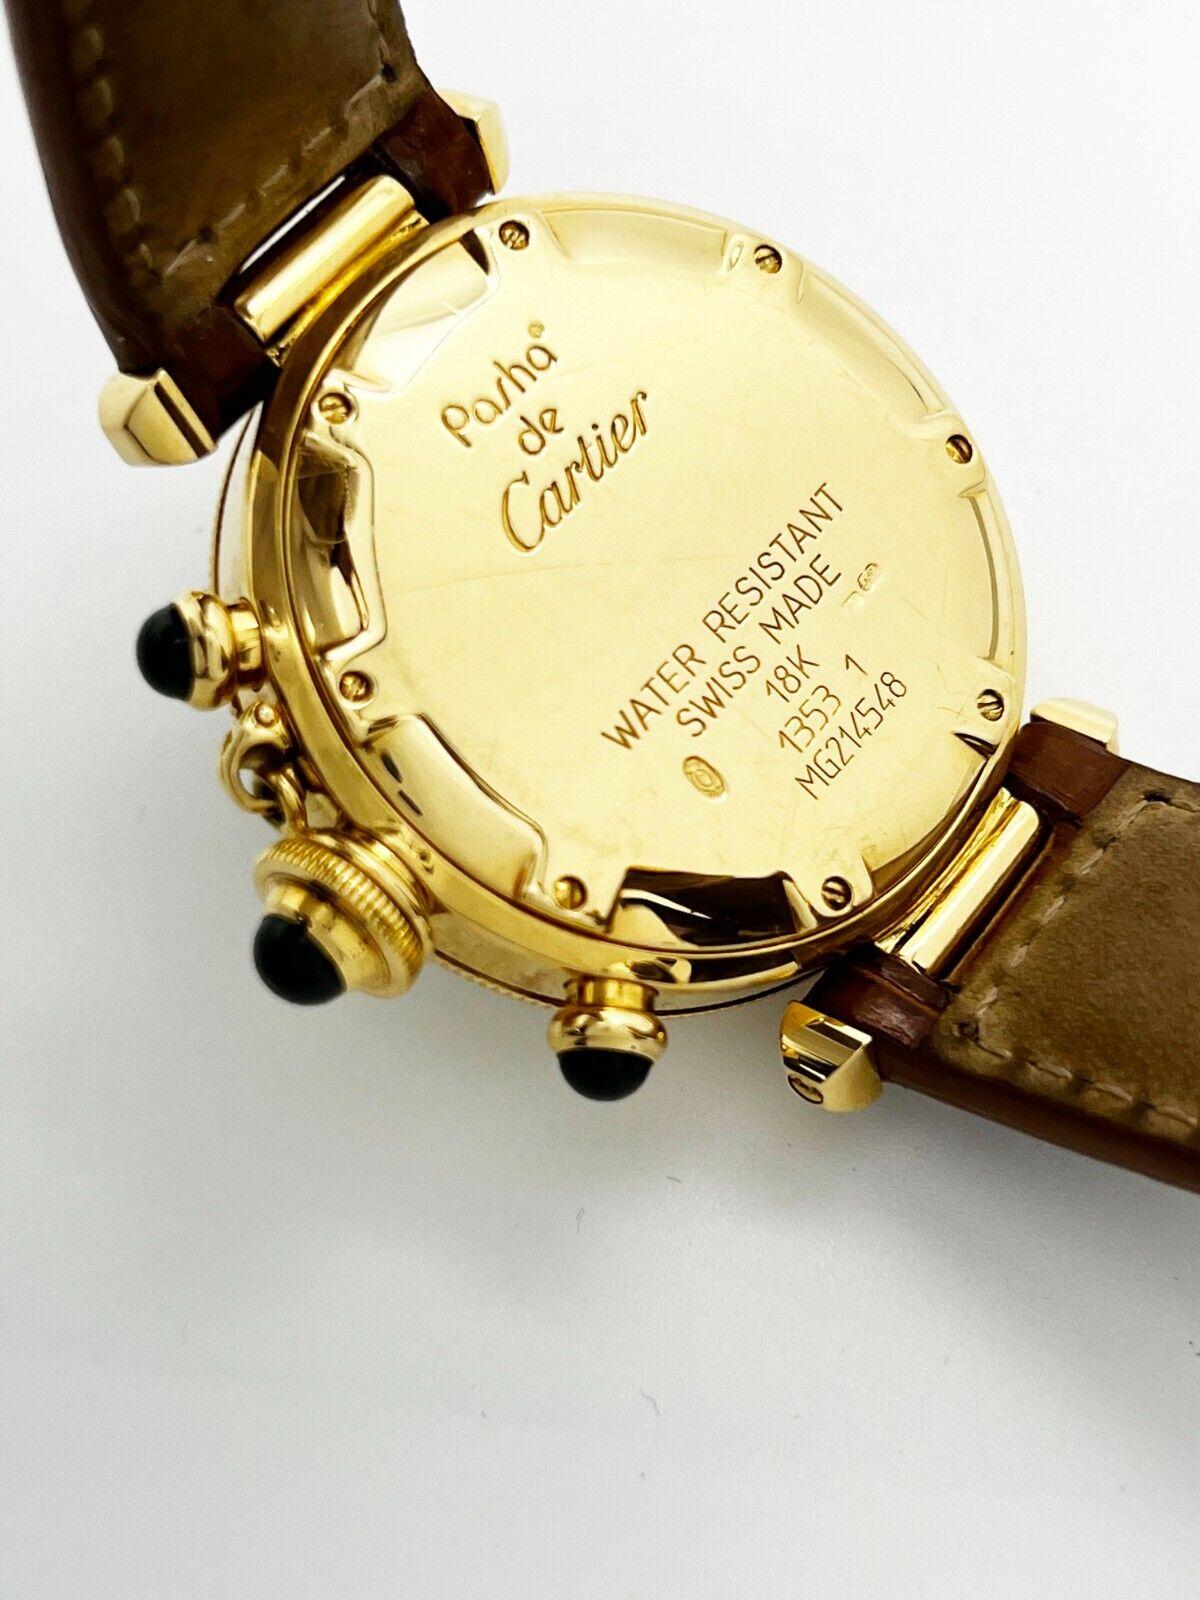 Cartier Pasha Ref 1353 Chronograph 18K Yellow Gold 35mm Leather Strap For Sale 4